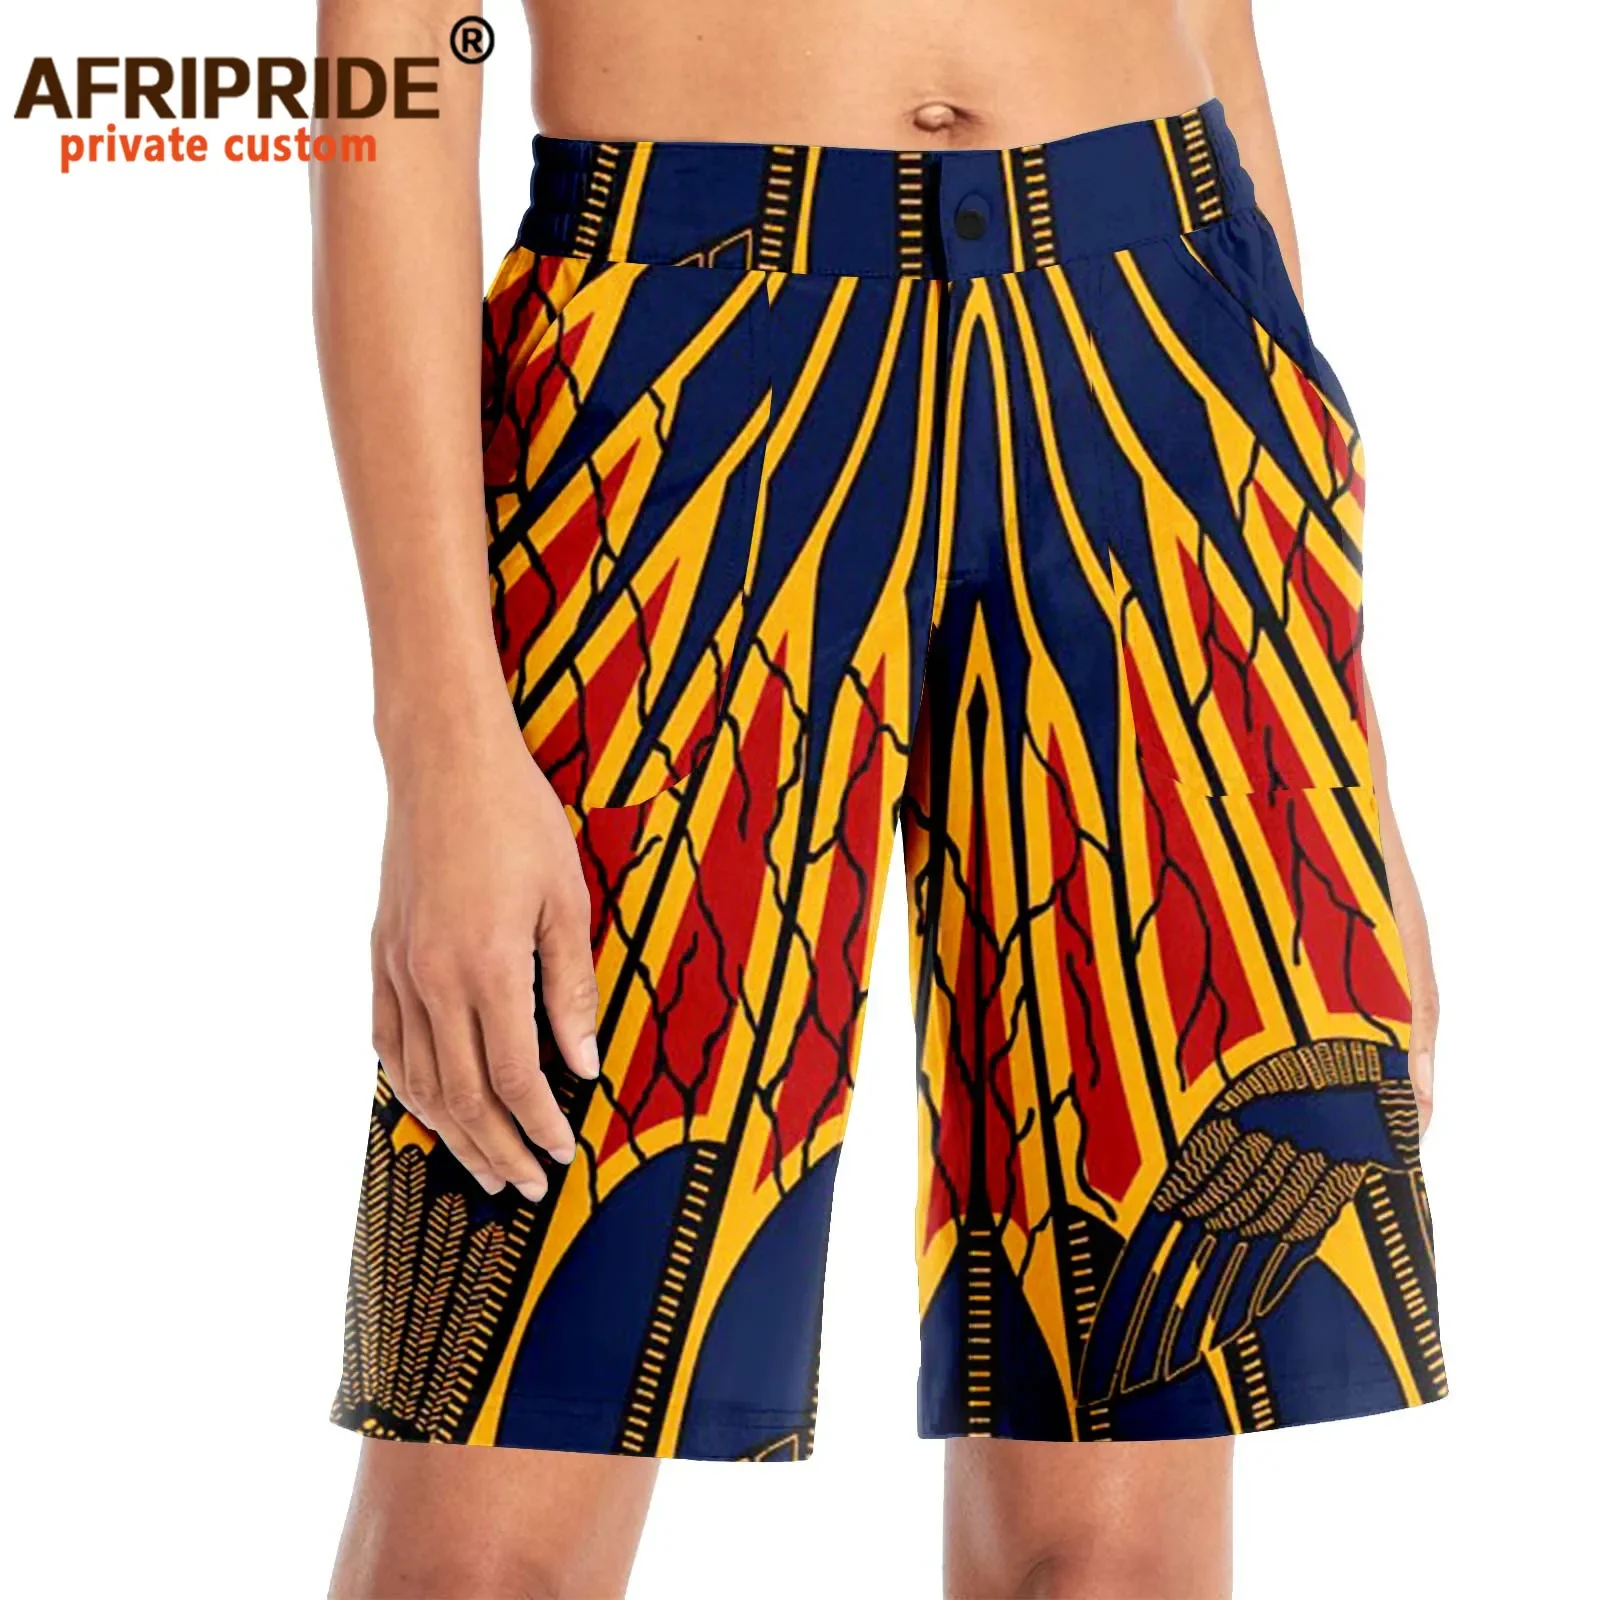 African Shorts for Women Summer Fashion Casual Sexy Print Short Cotton Plus Size Casual High Waist with Two Pockets A2121002